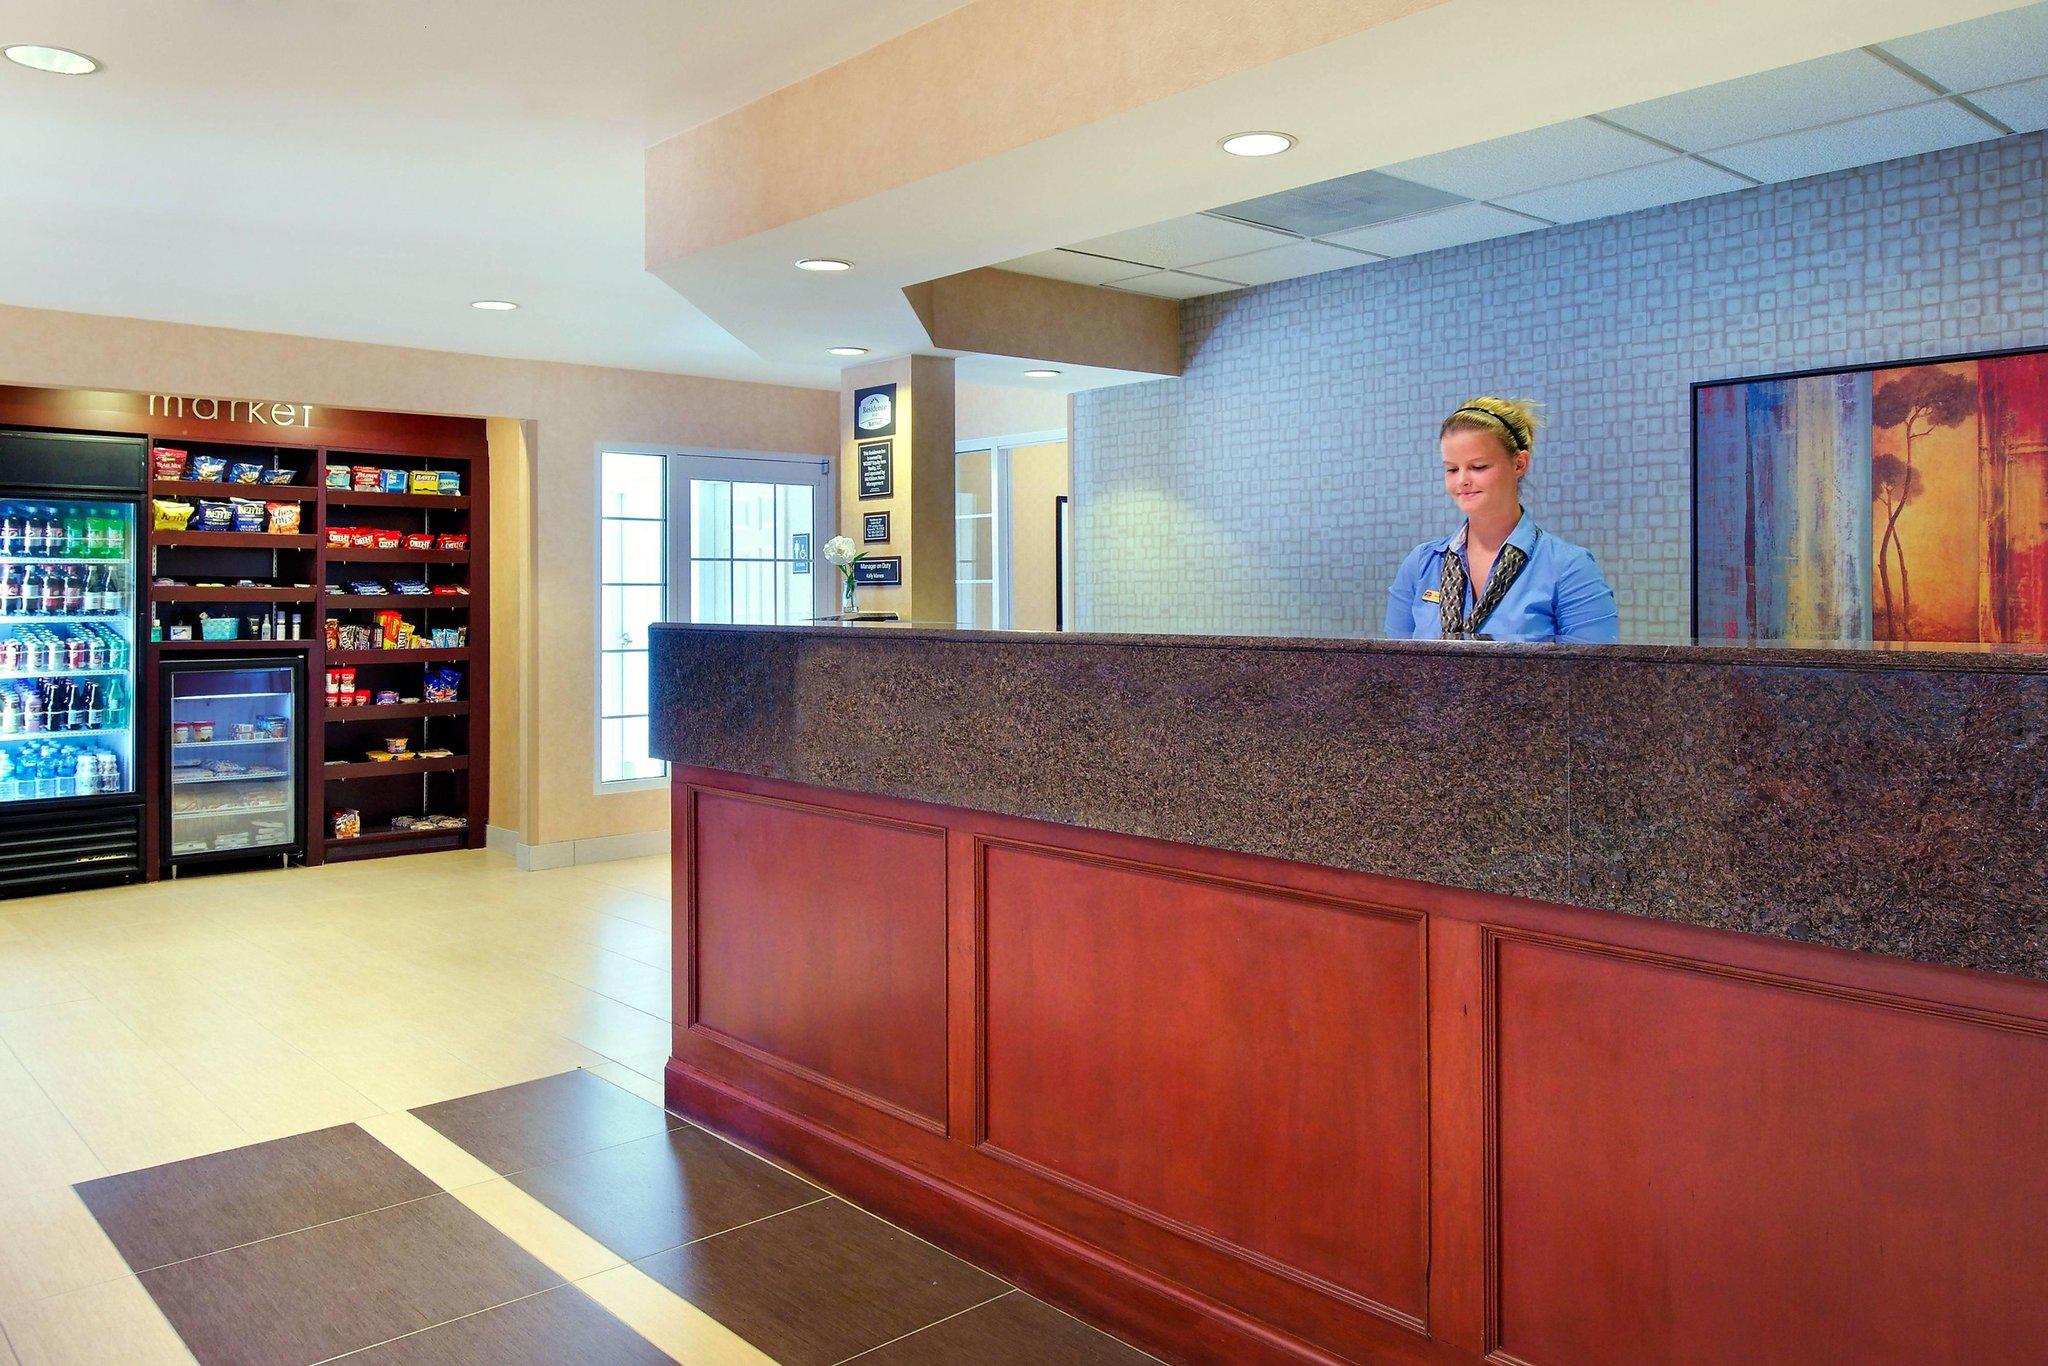 Residence Inn by Marriott Knoxville Cedar Bluff, Knoxville Tennessee